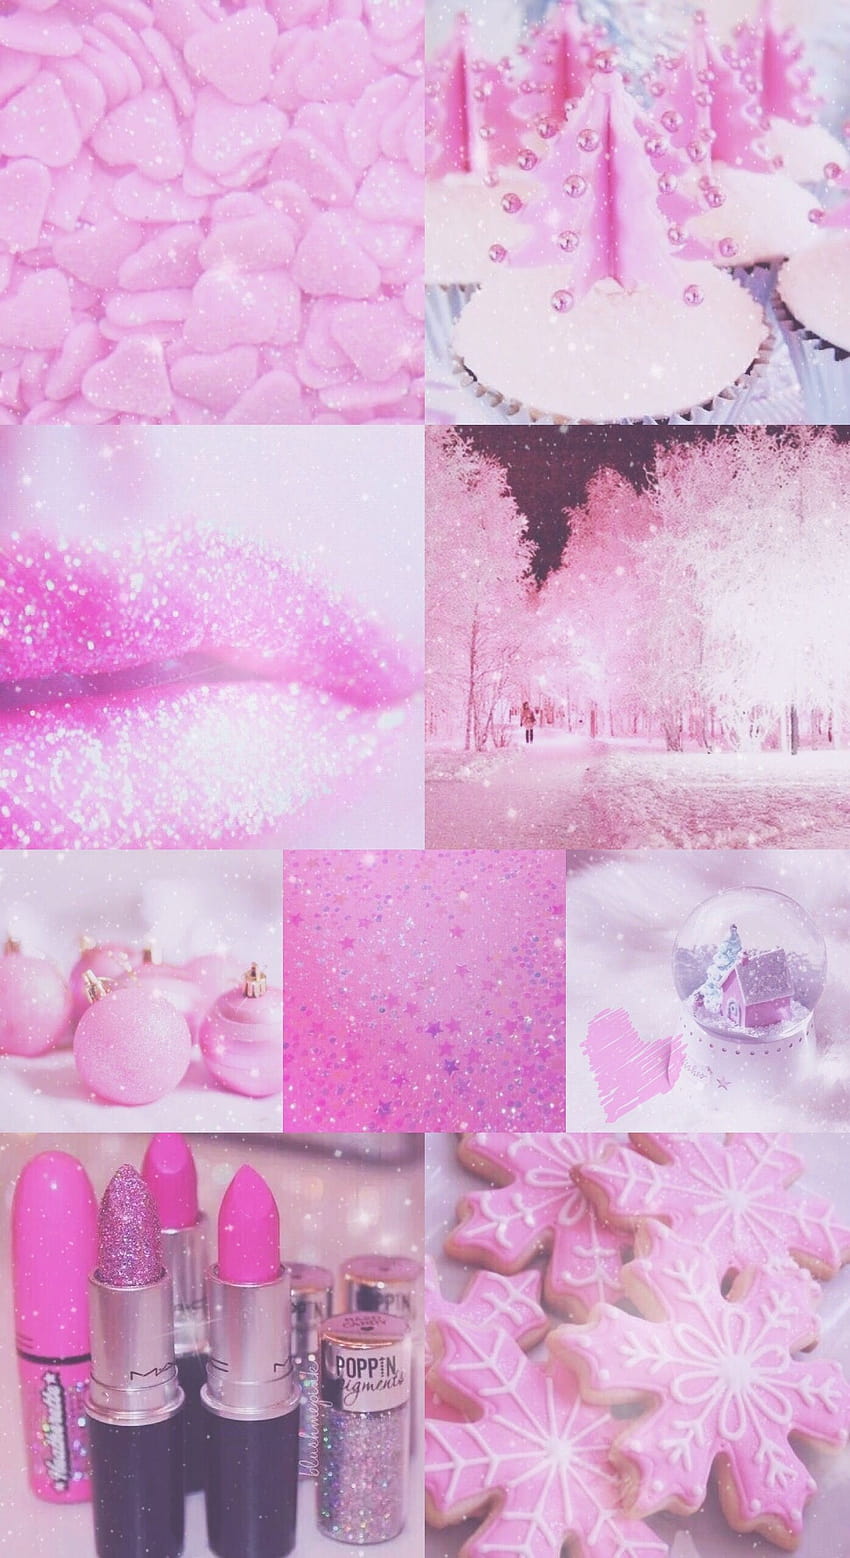 Pink Christmas posted by Michelle Thompson, aesthetic christmas pink HD ...